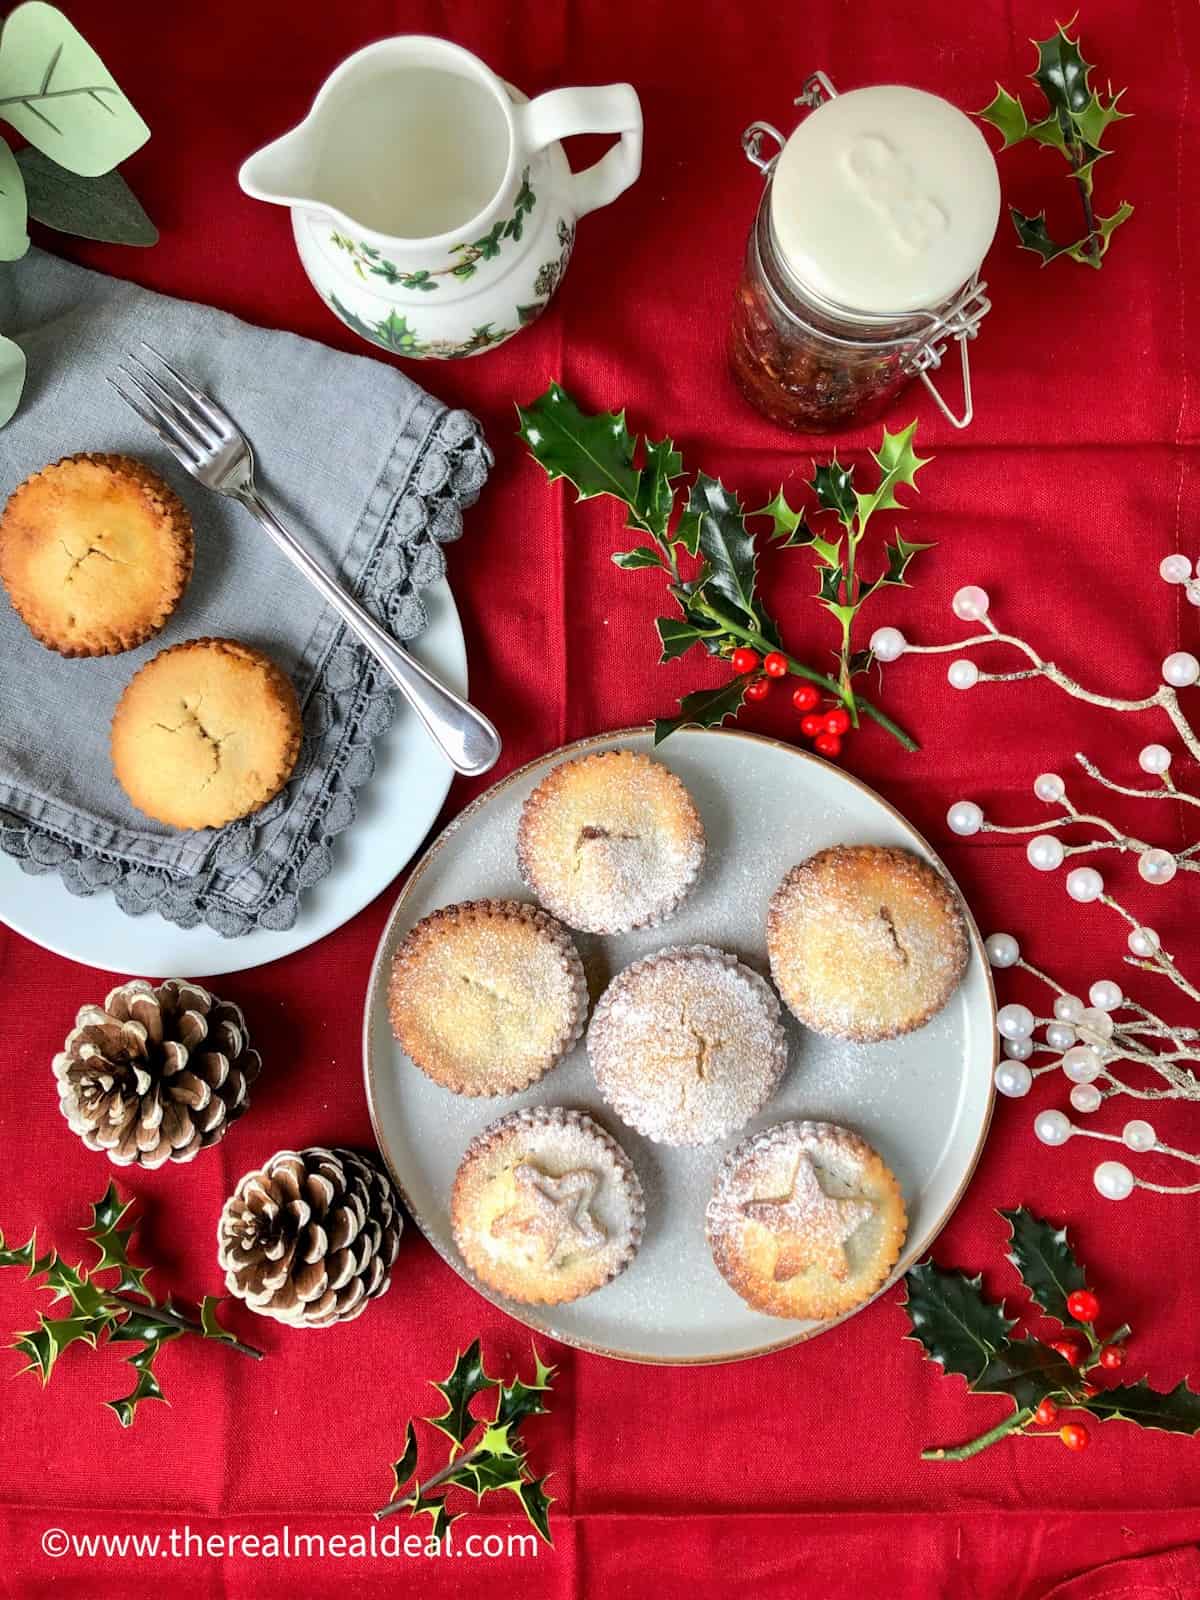 Plate of Christmas mince pies dusted with icing sugar on red cloth surrounded by christmas holly decoration